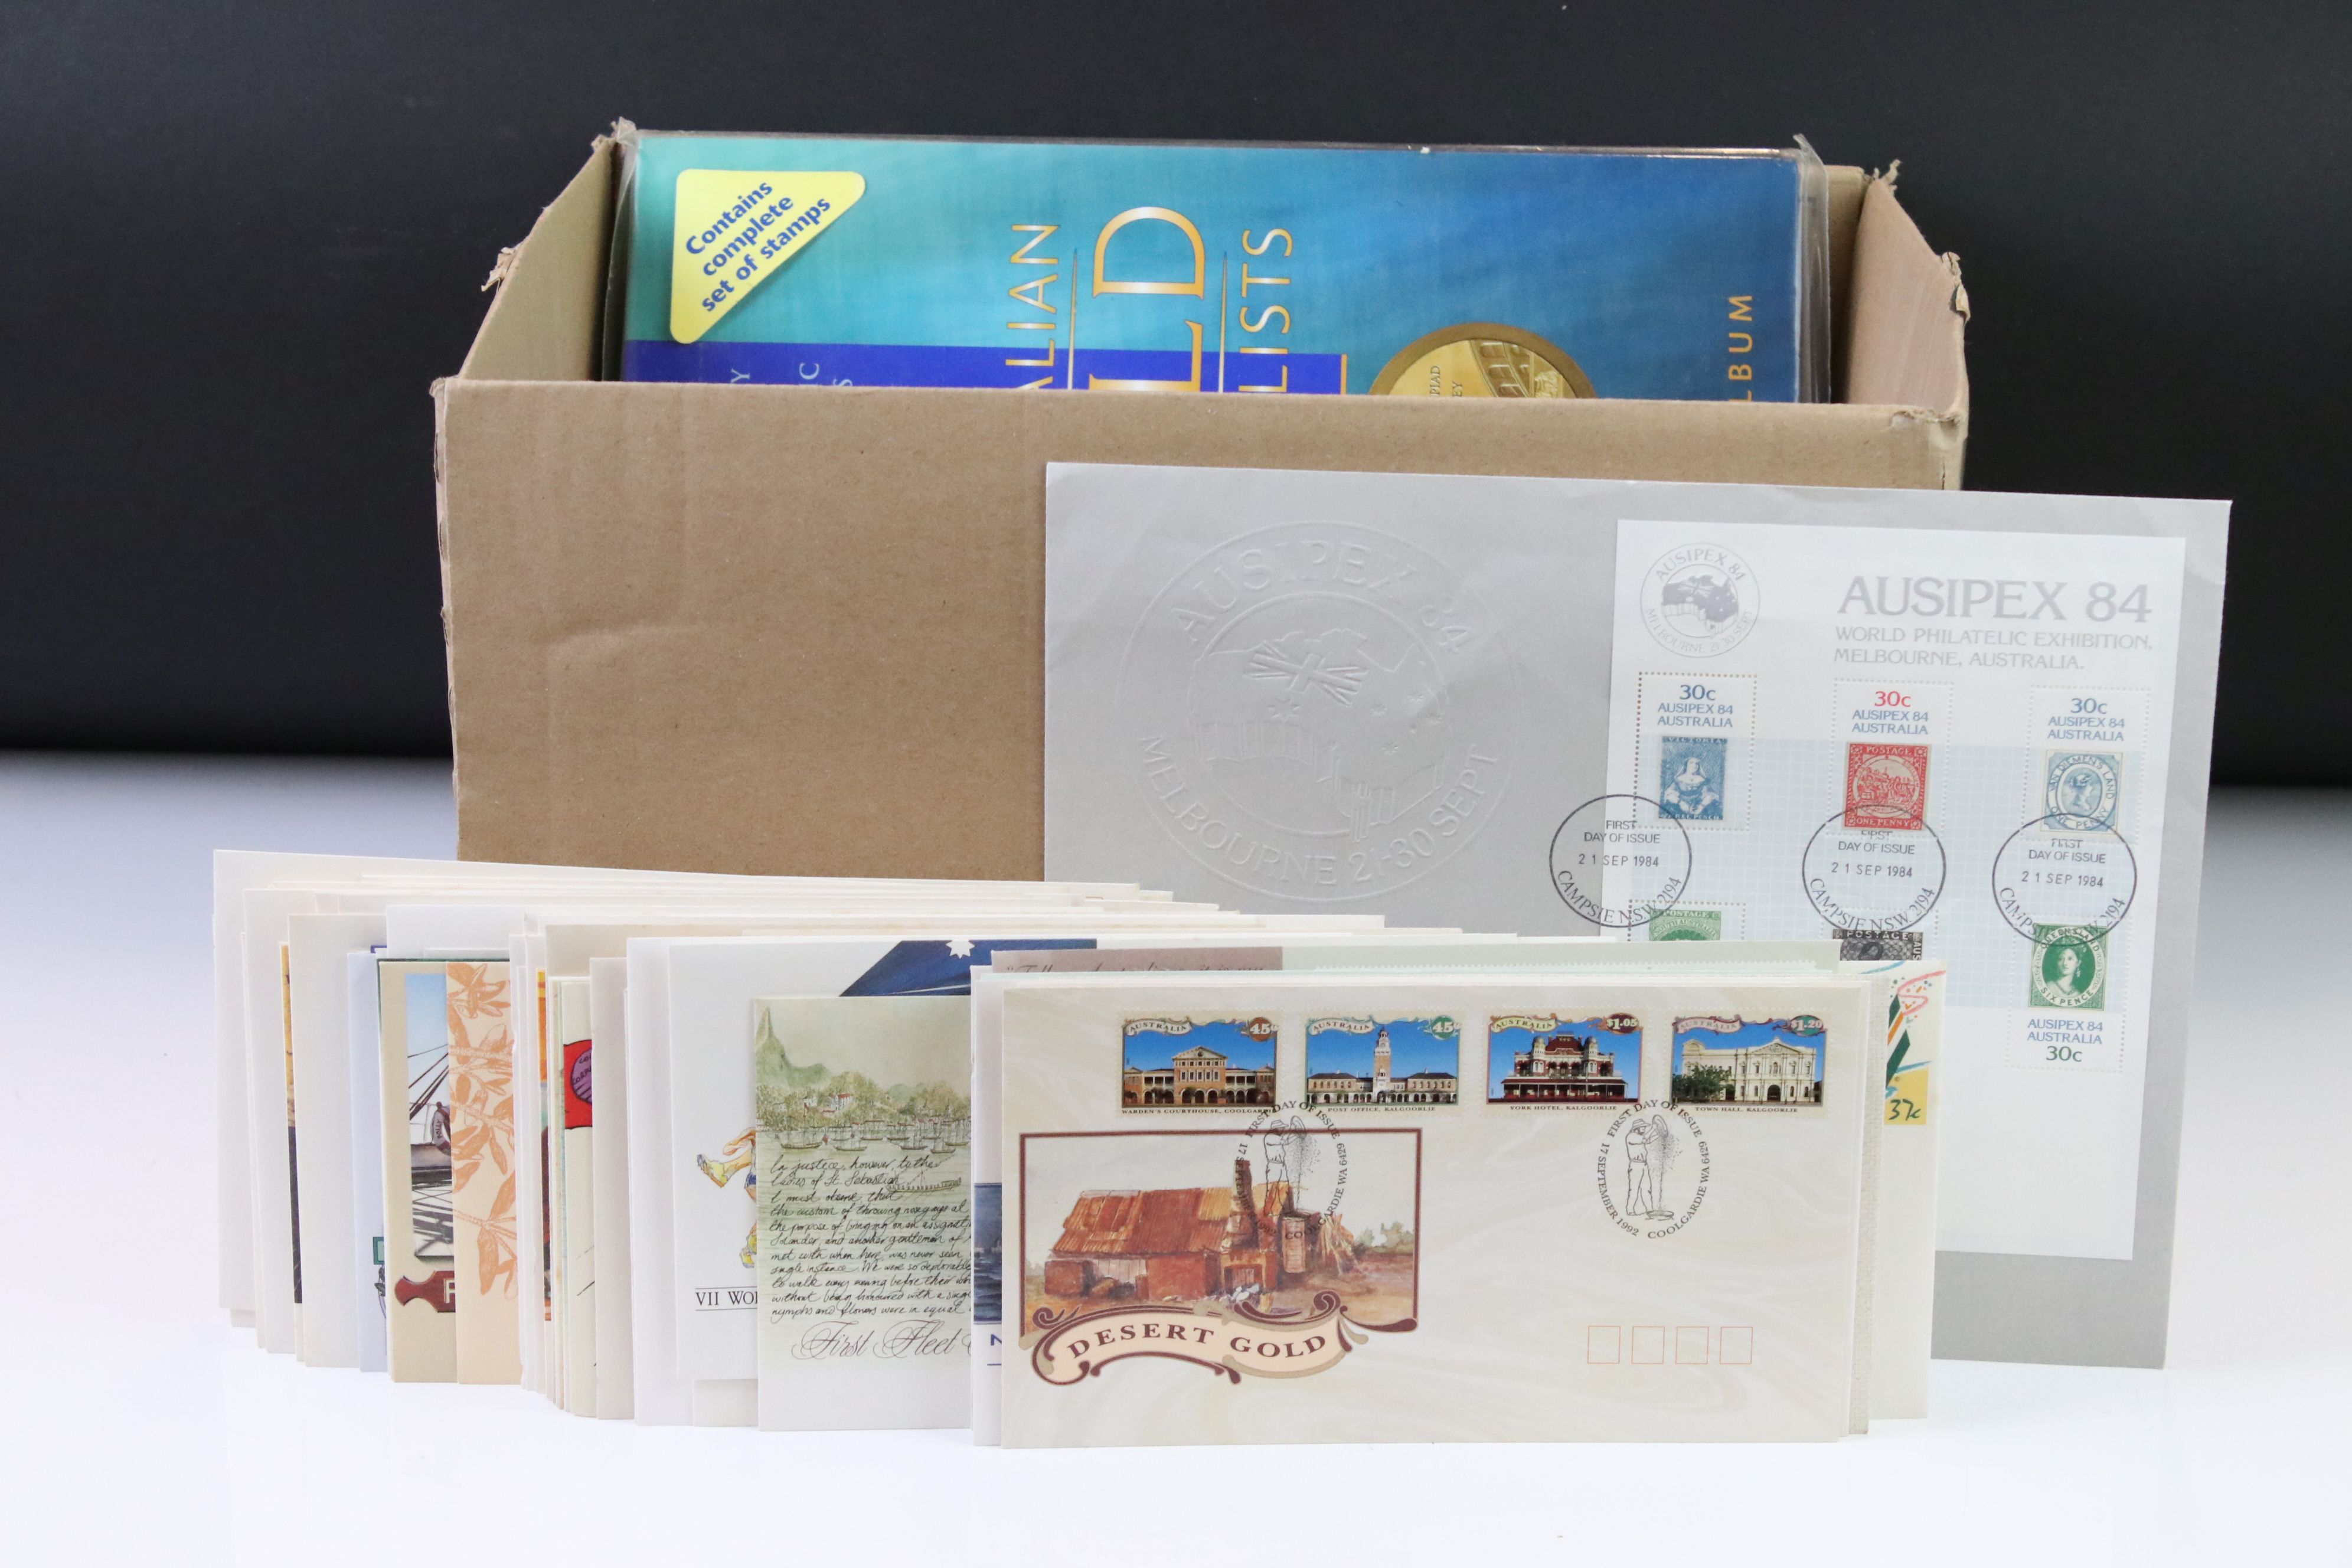 Collection of Australian stamps, FDCs etc, to include Sydney 2000 Olympic Games Gold Medallists